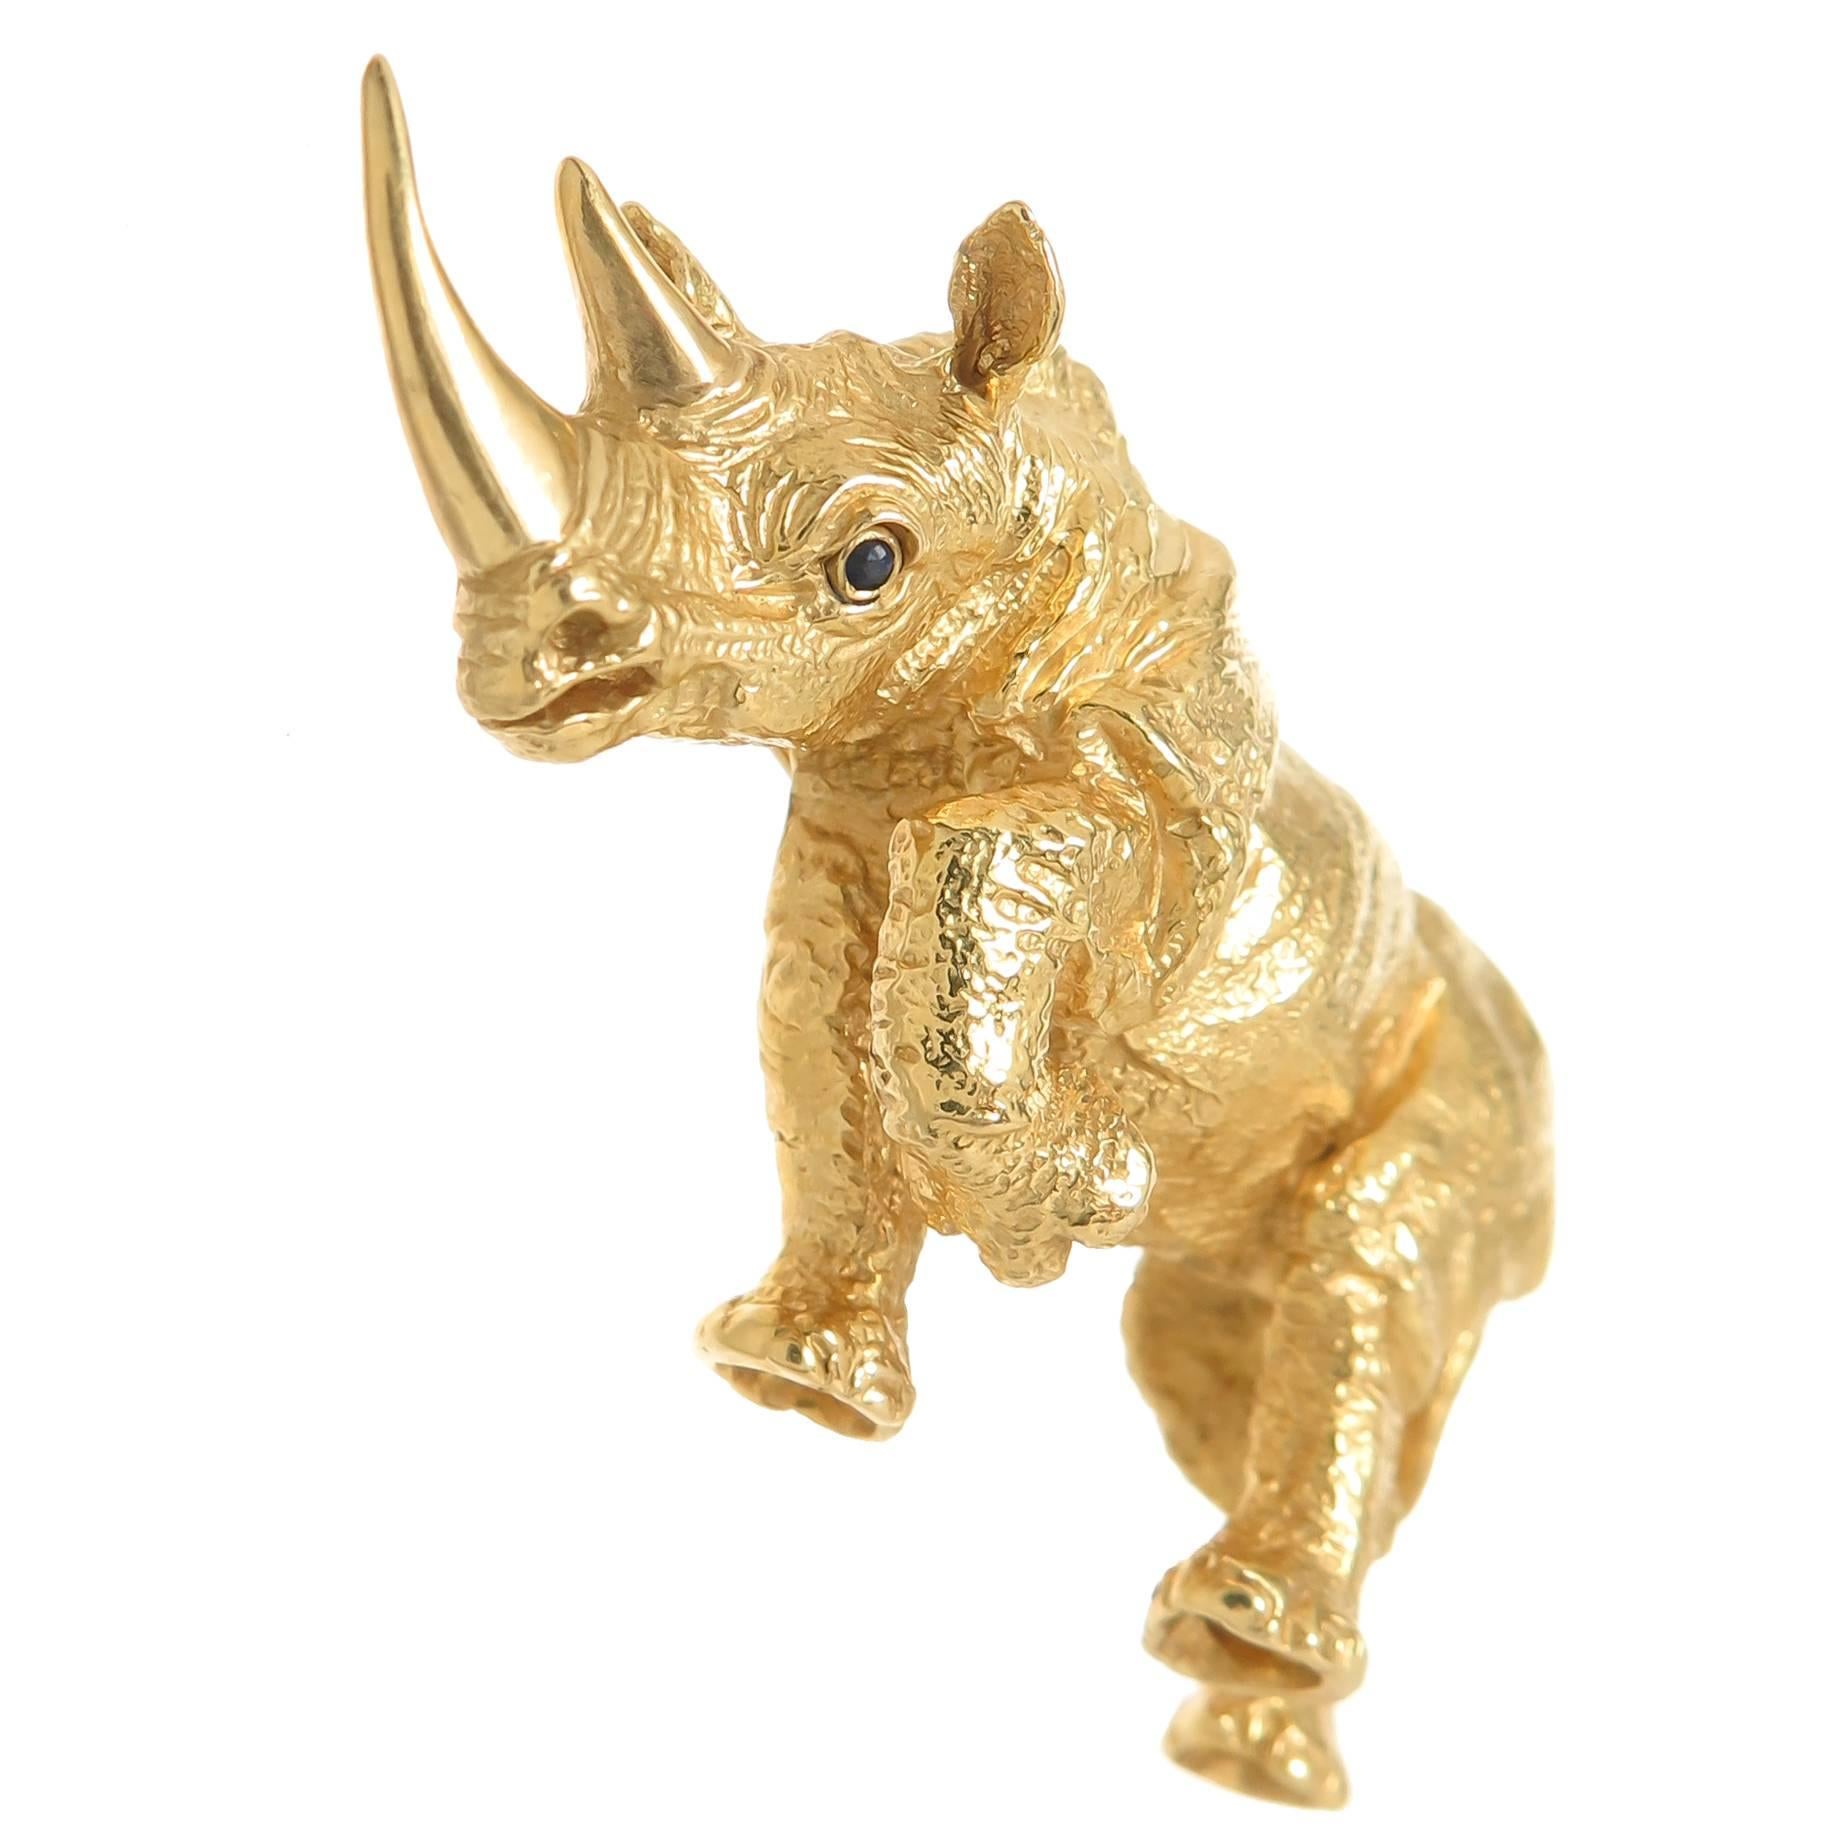 Circa 1980 Tiffany & Company 18K Yellow Gold Rhino Brooch measuring 2 1/4 inch in length. Very detailed with a textured finish and a Sapphire eye. Comes in original Tiffany presentation box.